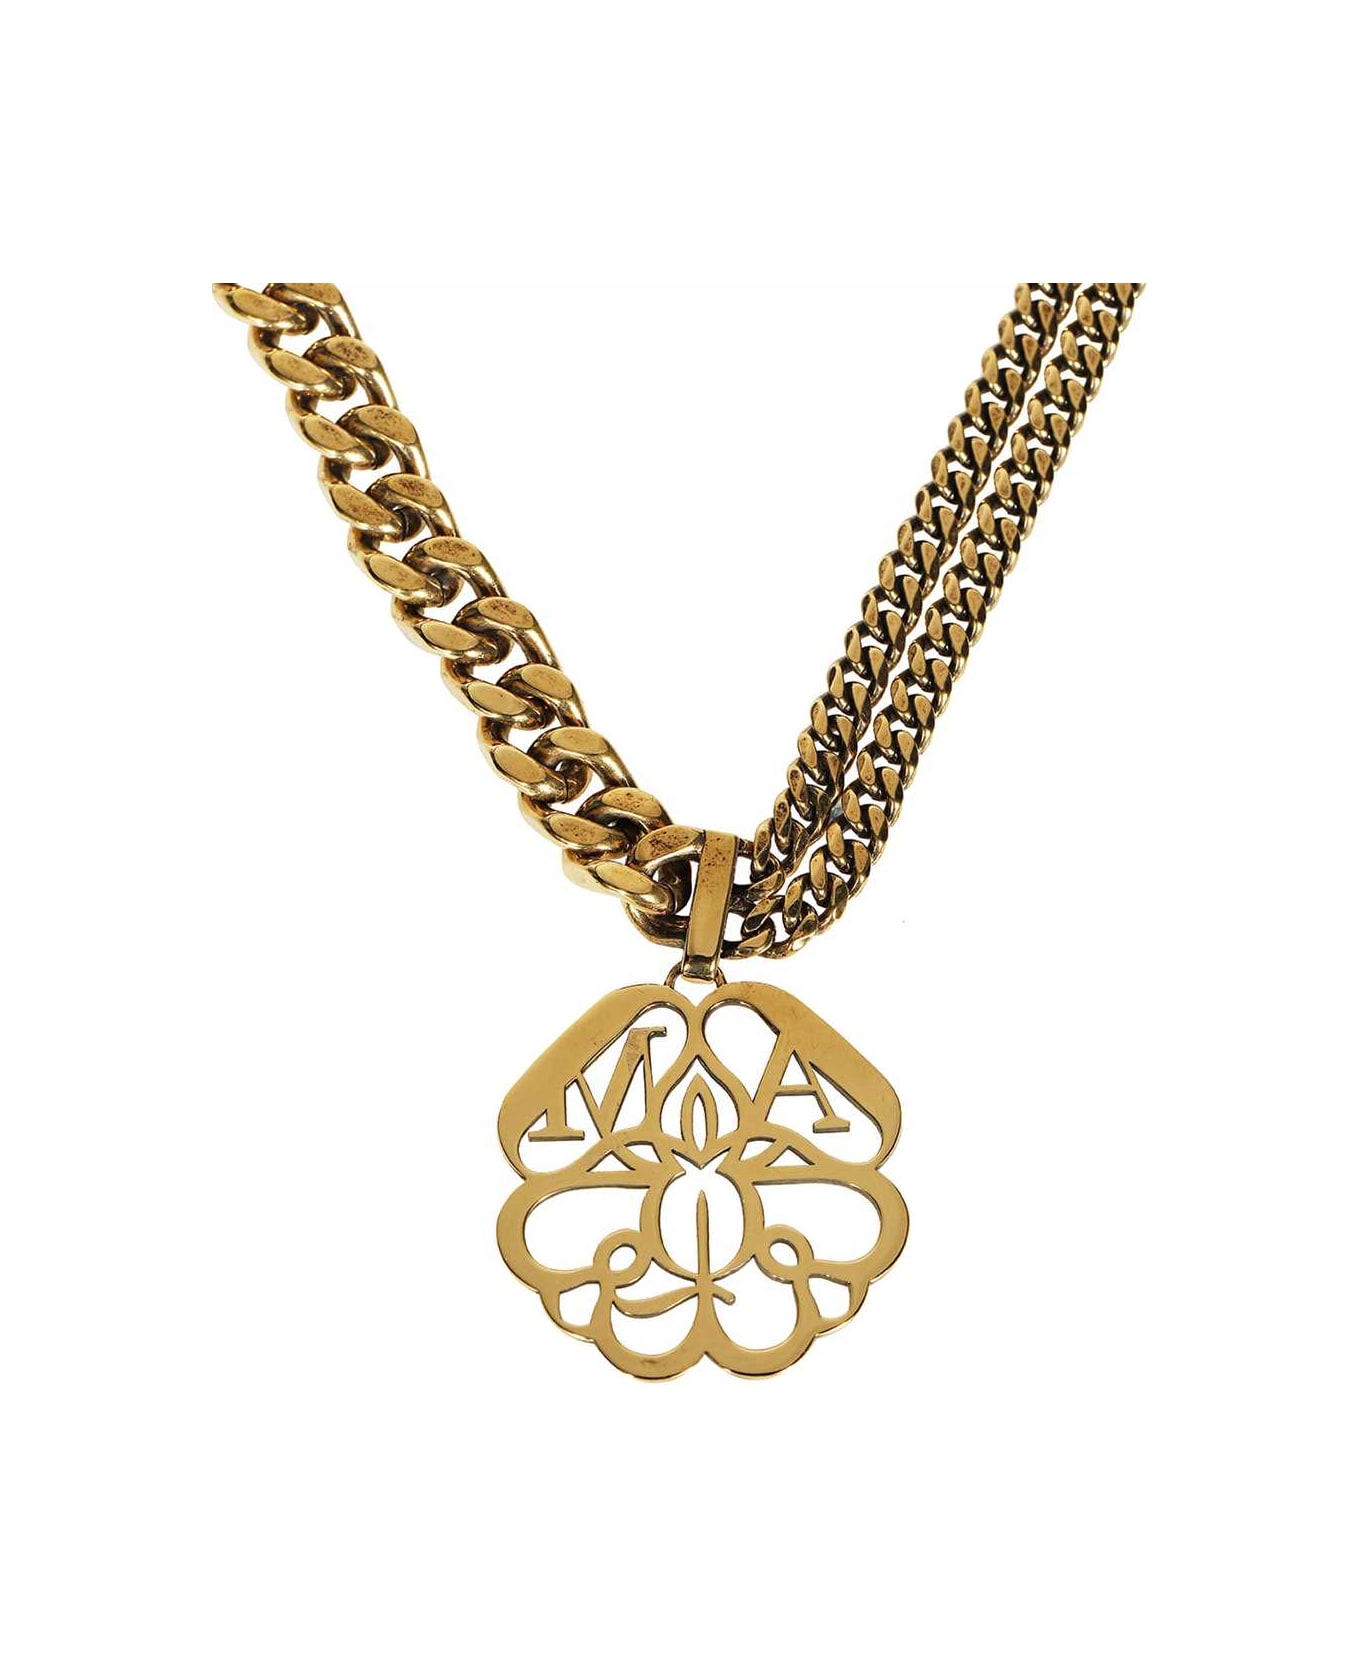 Alexander McQueen Pendant Chain Necklace - Gold ネックレス